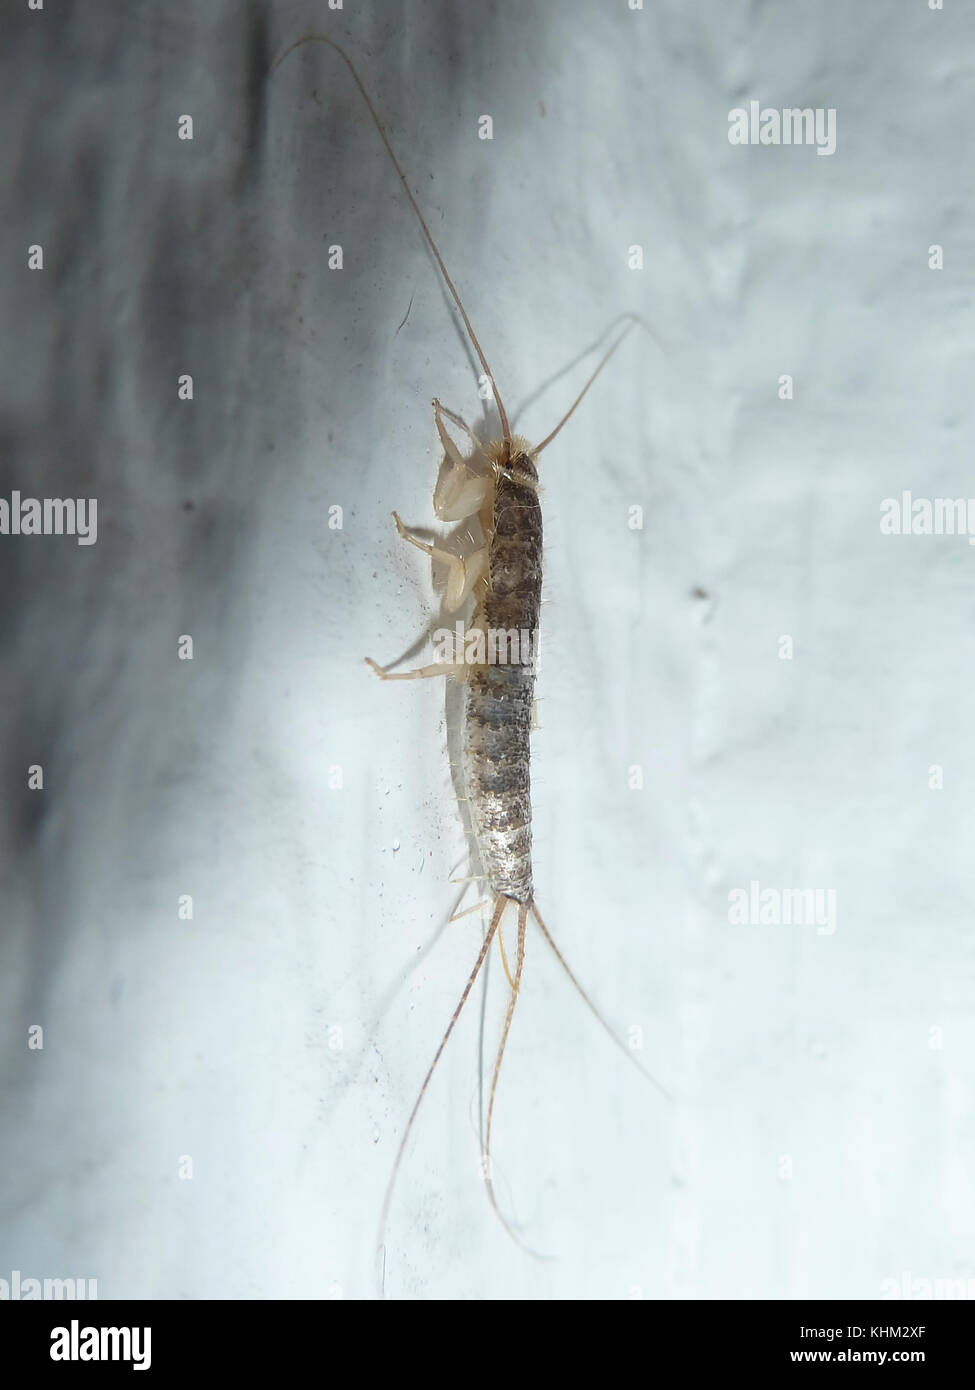 silverfish. Insect Lepisma saccharina, Thermobia domestica in normal habitat Stock Photo